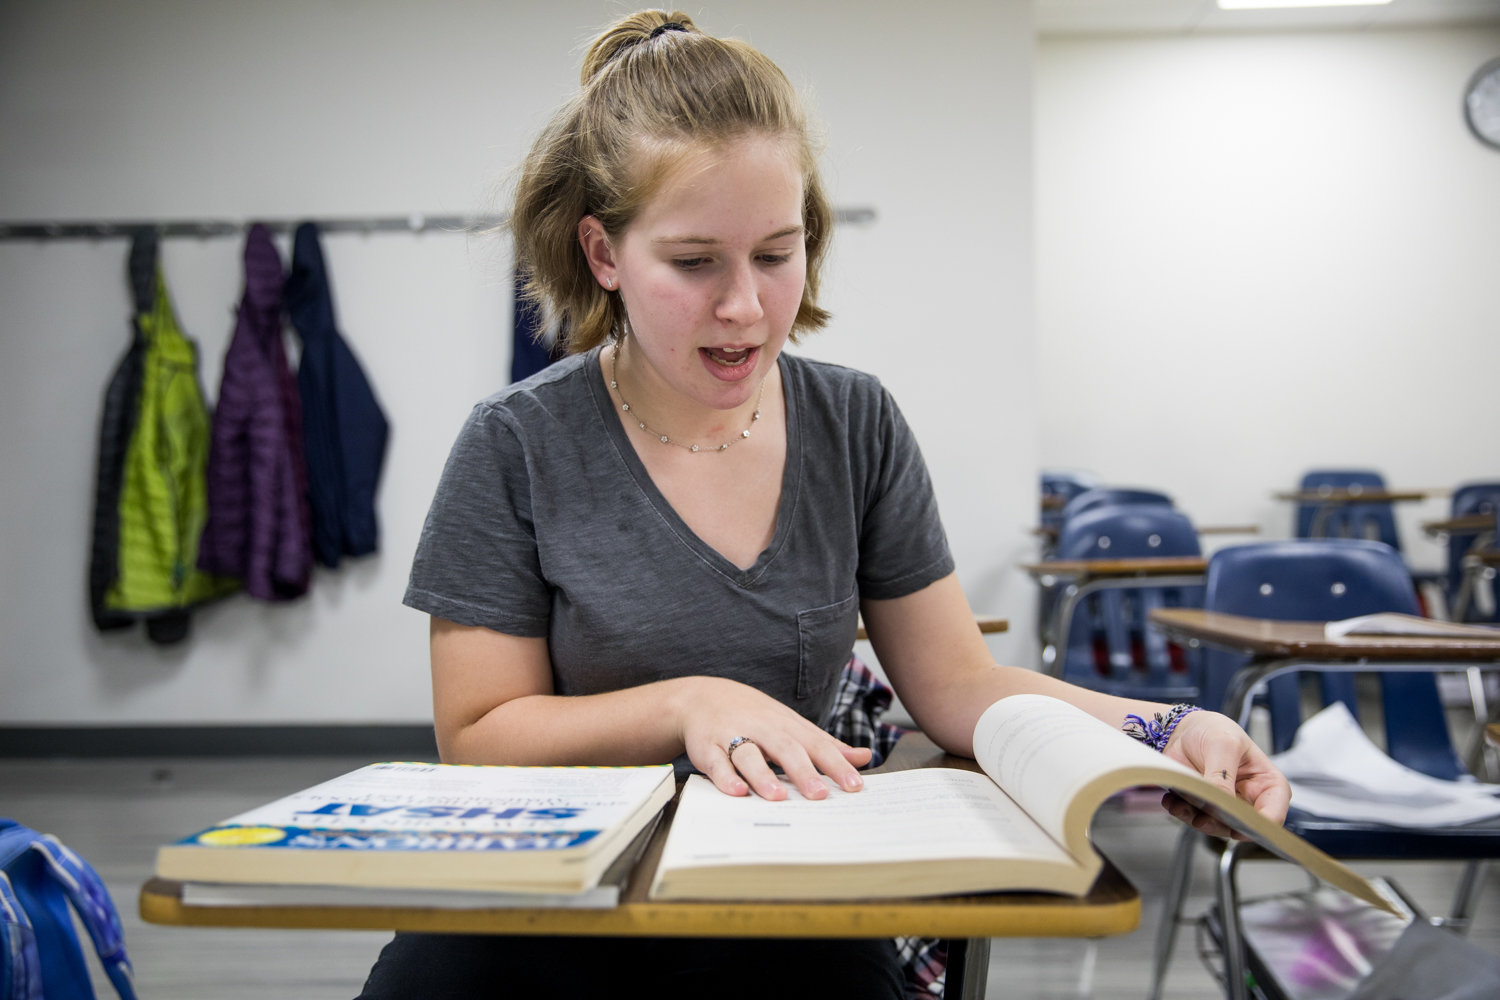 Kinneret Day School student Talia Schuldenrein looks through one of the test prep books she used to study for the Specialized High School Admissions Test, which she took along with thousands of other students Oct. 26. Talia hopes to get into Bronx Science where her father went to school.